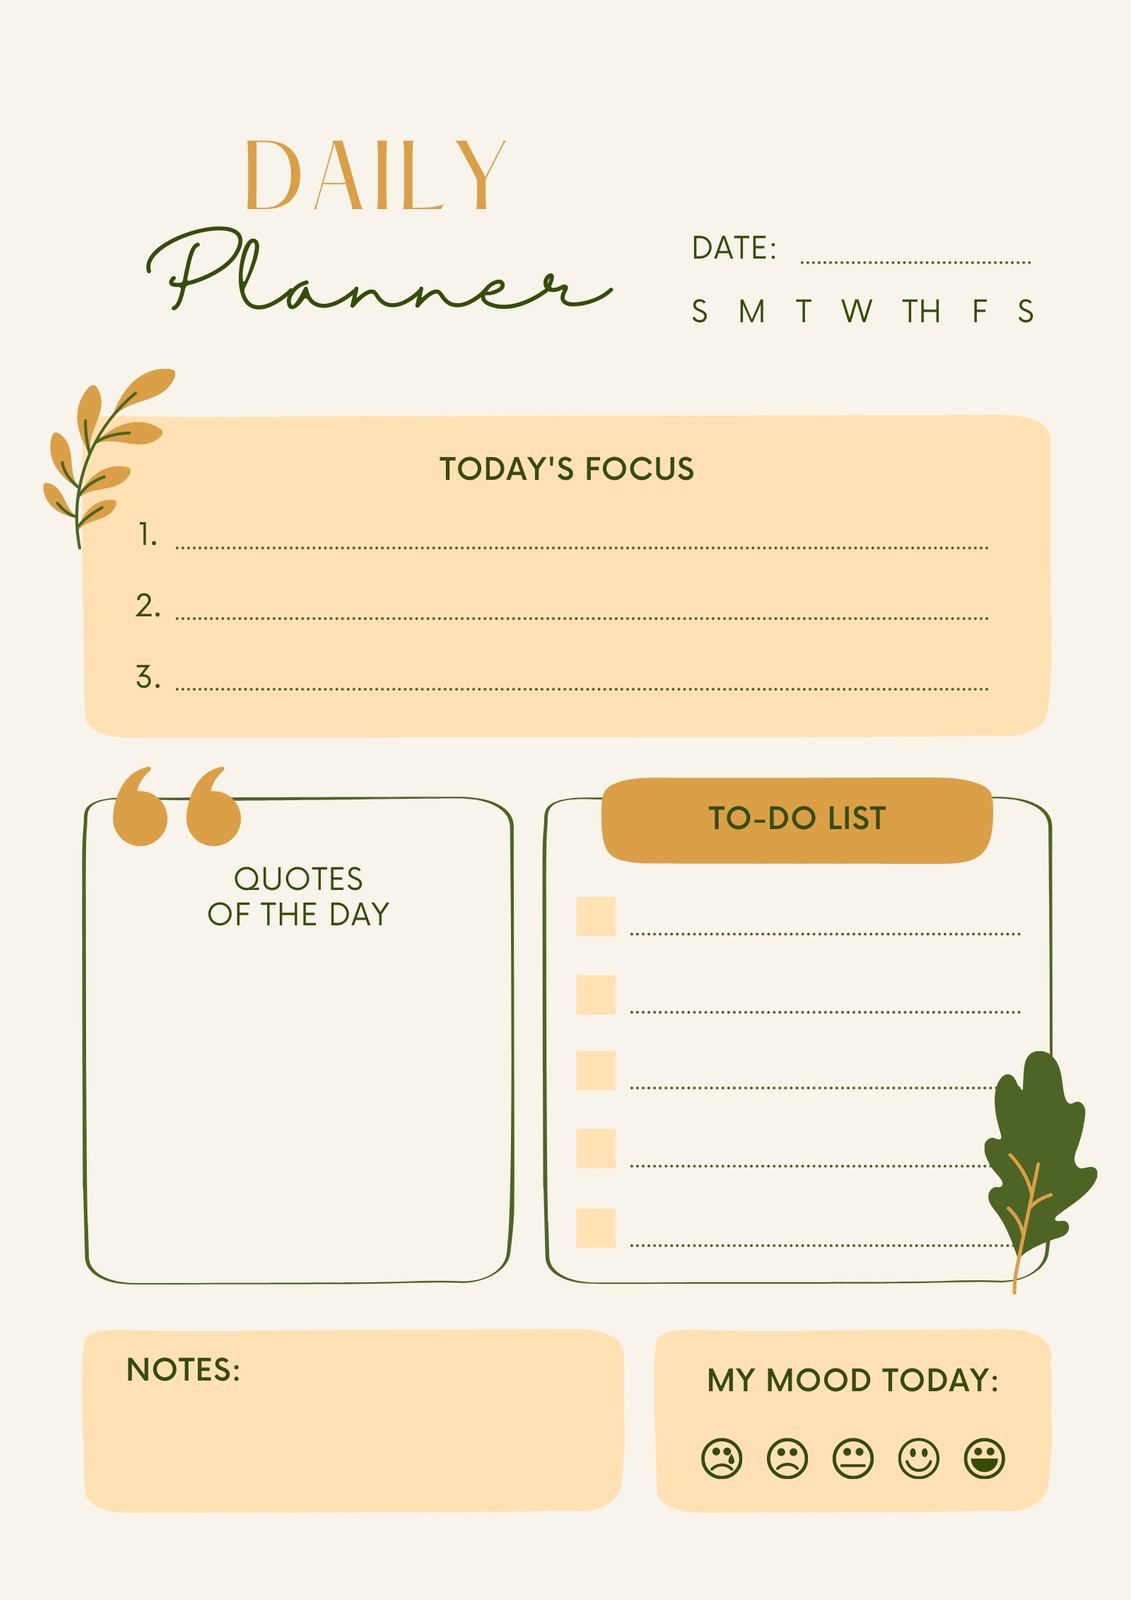 Page 21 - Free daily planner templates to customize | Canva